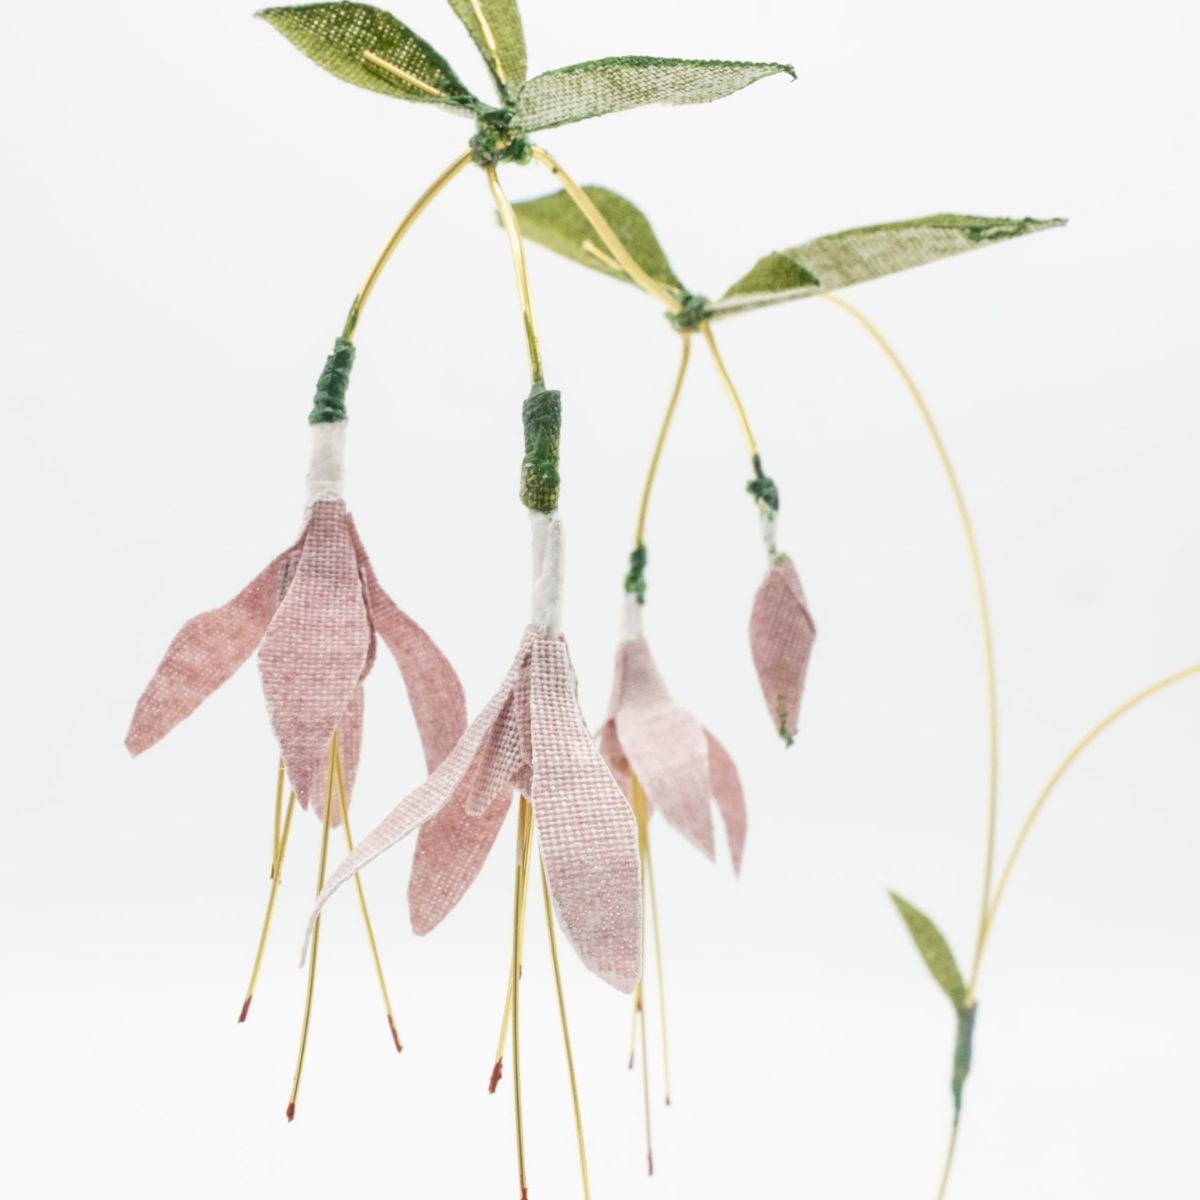 Flowers made from wire and textile by Lauren Pruen on Thursd